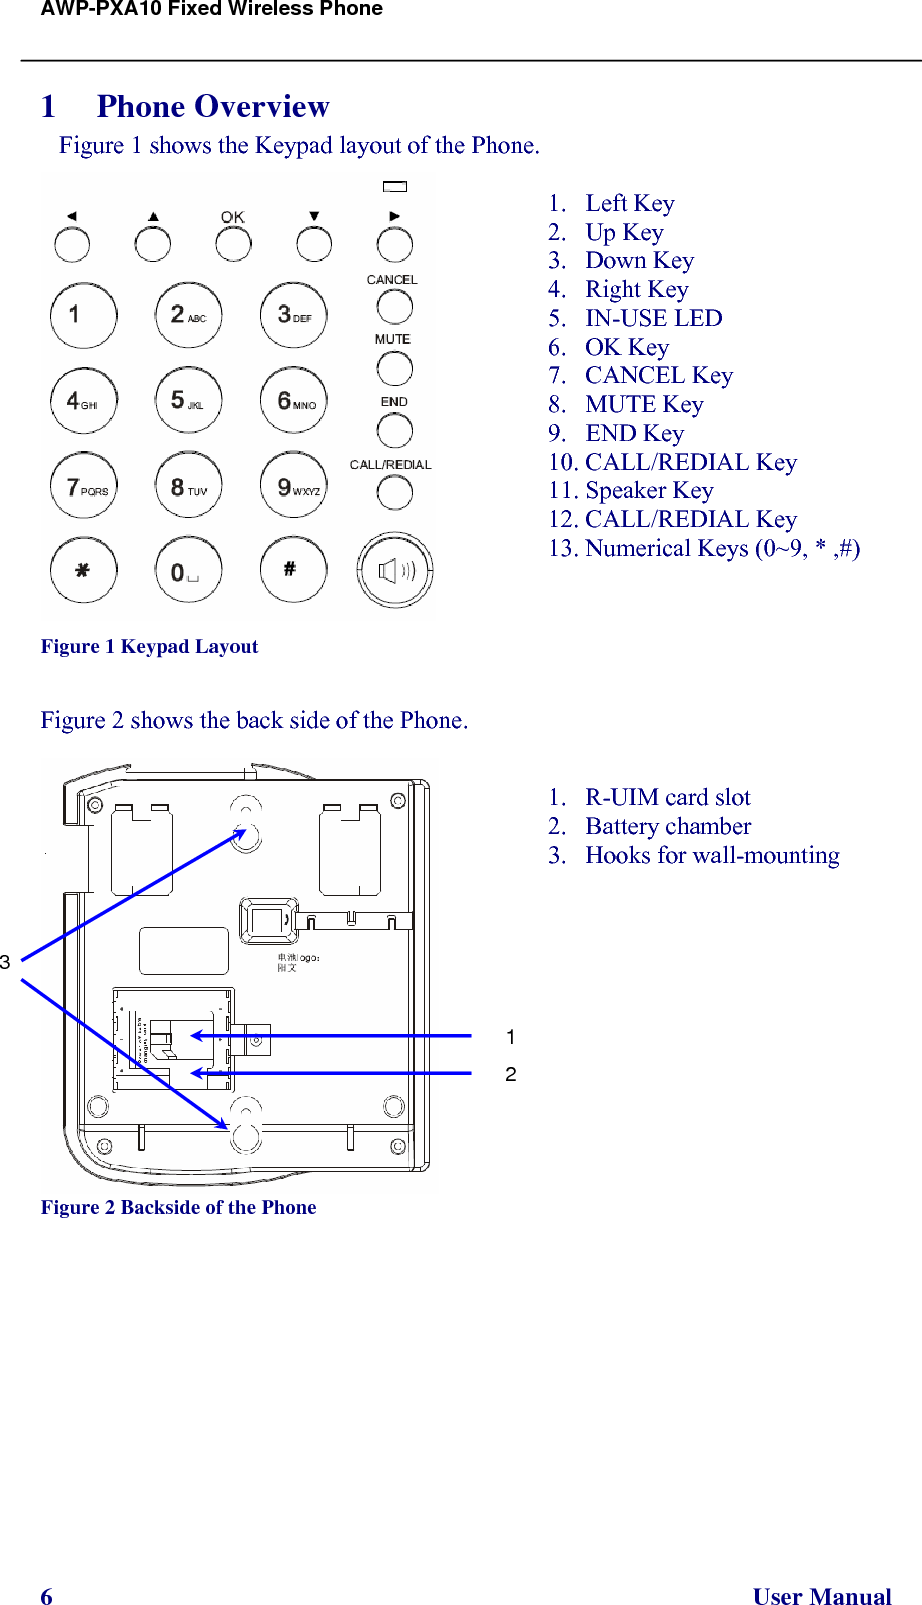 AWP-PXA10 Fixed Wireless Phone 6                                                                                                                User Manual 1 Phone Overview Figure 1 shows the Keypad layout of the Phone.   Figure 1 Keypad Layout  1. Left Key 2. Up Key 3. Down Key 4. Right Key   5. IN-USE LED 6. OK Key 7. CANCEL Key 8. MUTE Key 9. END Key   10. CALL/REDIAL Key 11. Speaker Key   12. CALL/REDIAL Key 13. Numerical Keys (0~9, * ,#)    Figure 2 shows the back side of the Phone.    Figure 2 Backside of the Phone    1. R-UIM card slot 2. Battery chamber 3. Hooks for wall-mounting       12 3 